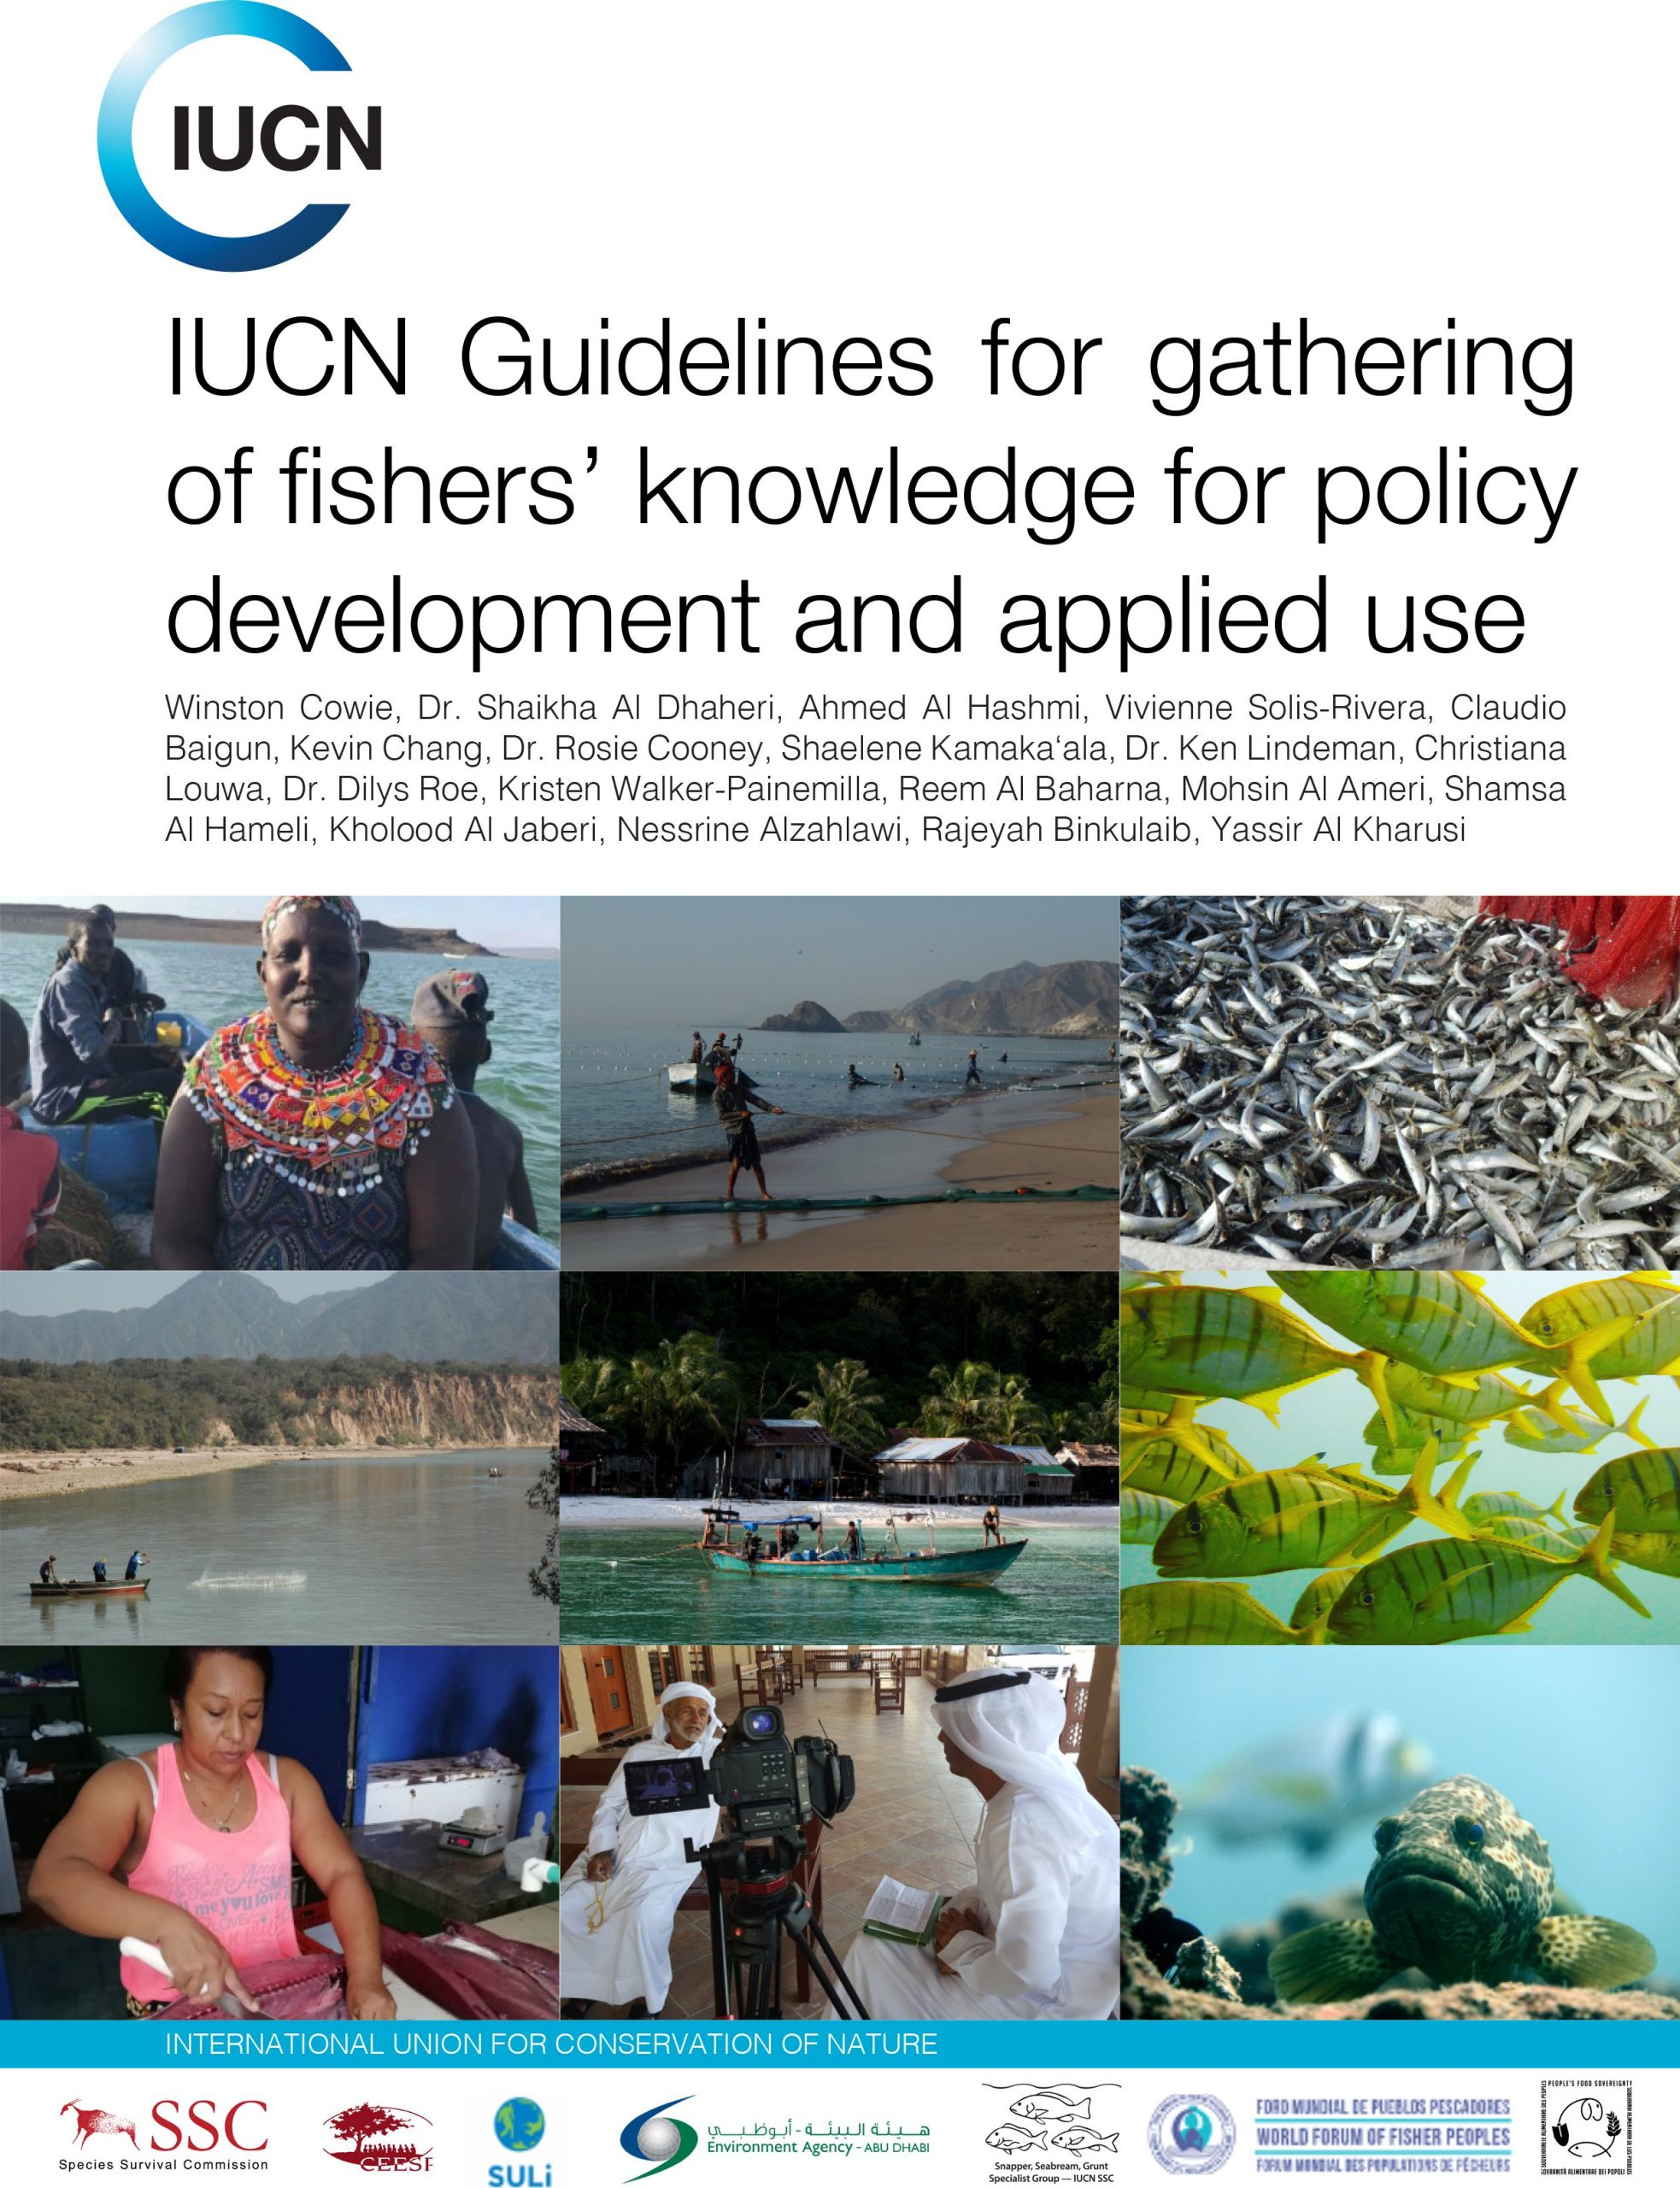 New guidelines on gathering fishers’ knowledge for policy development and conservation